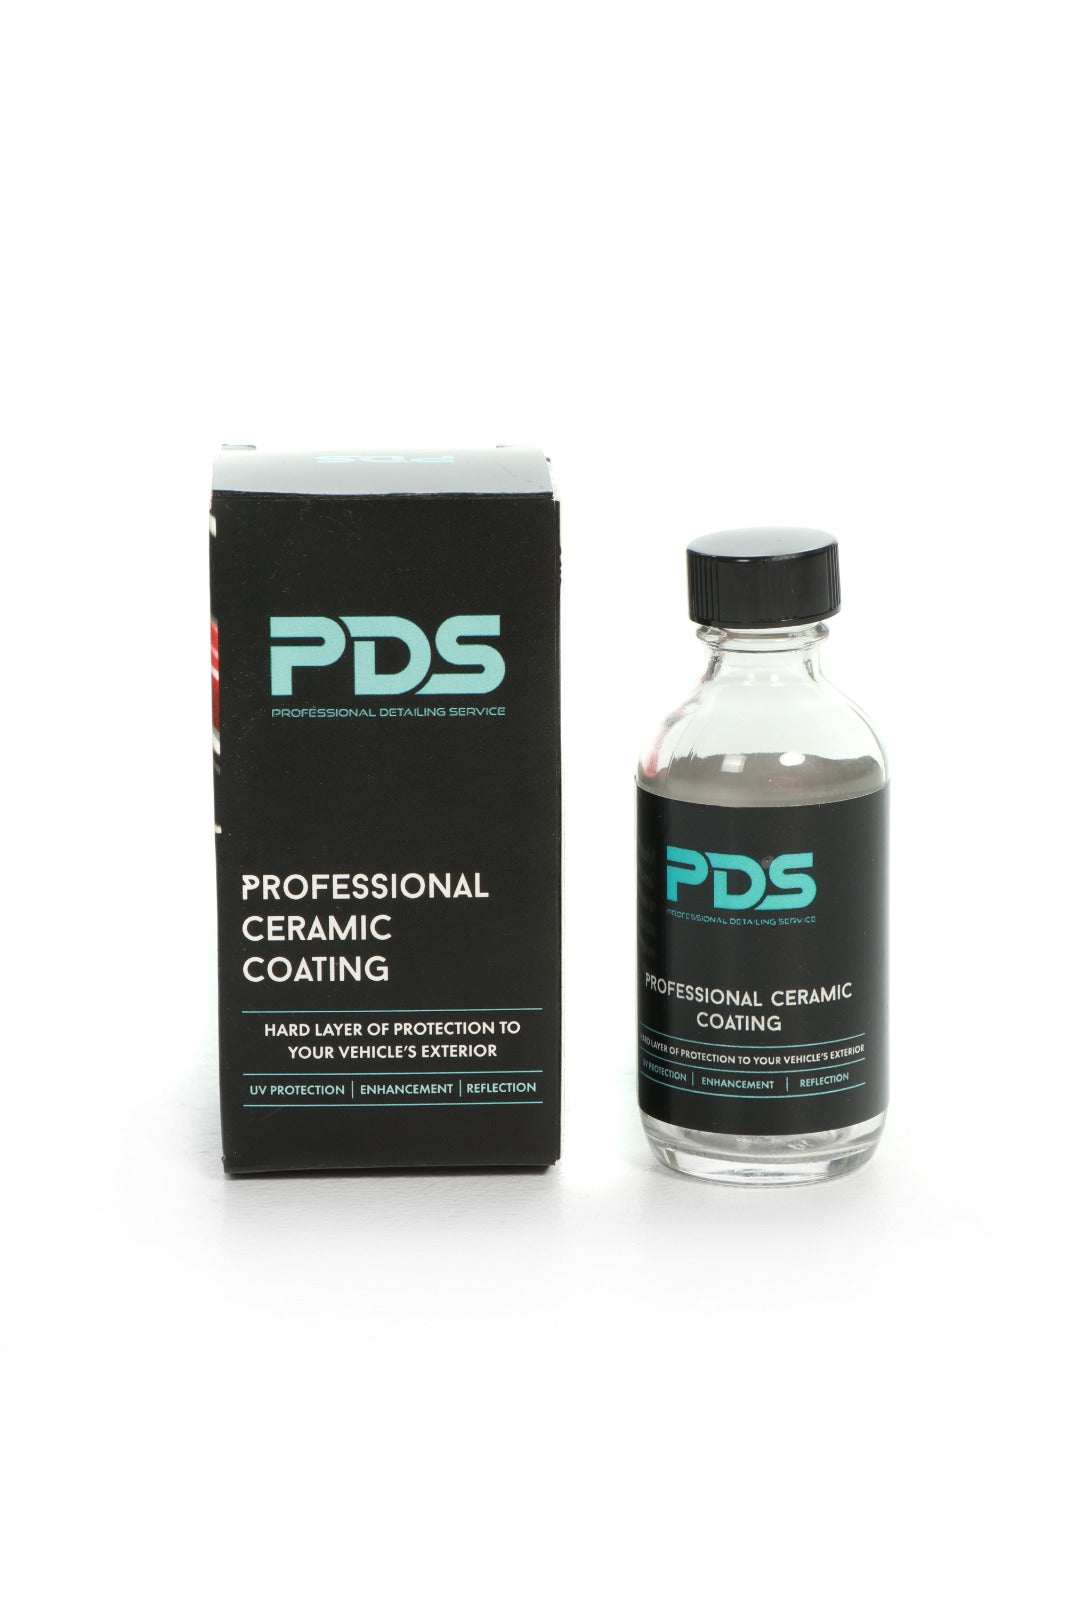 Ceramic Coating For Cars – PDS PRESSURE WASHERS